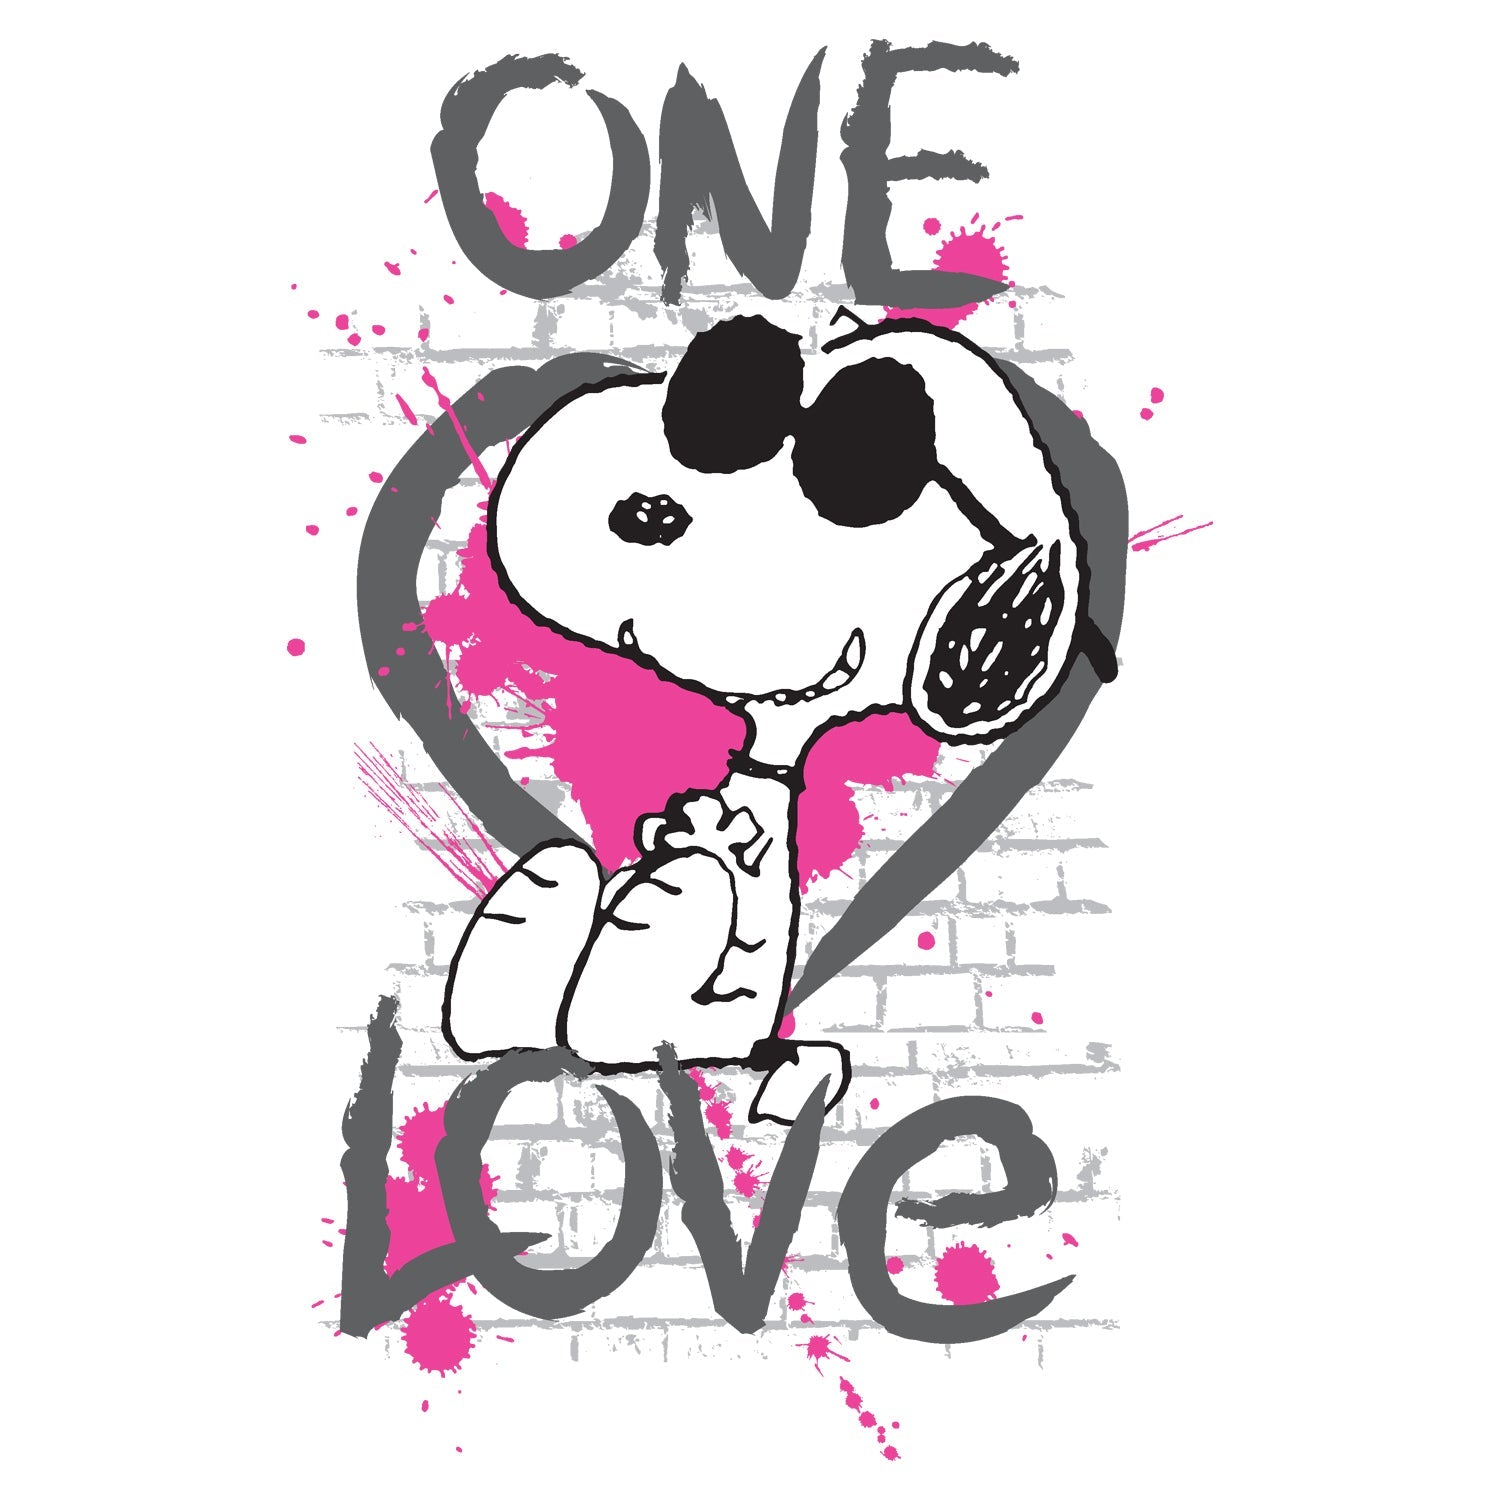 Peanuts Snoopy Graphic One Love Official Women's T-shirt